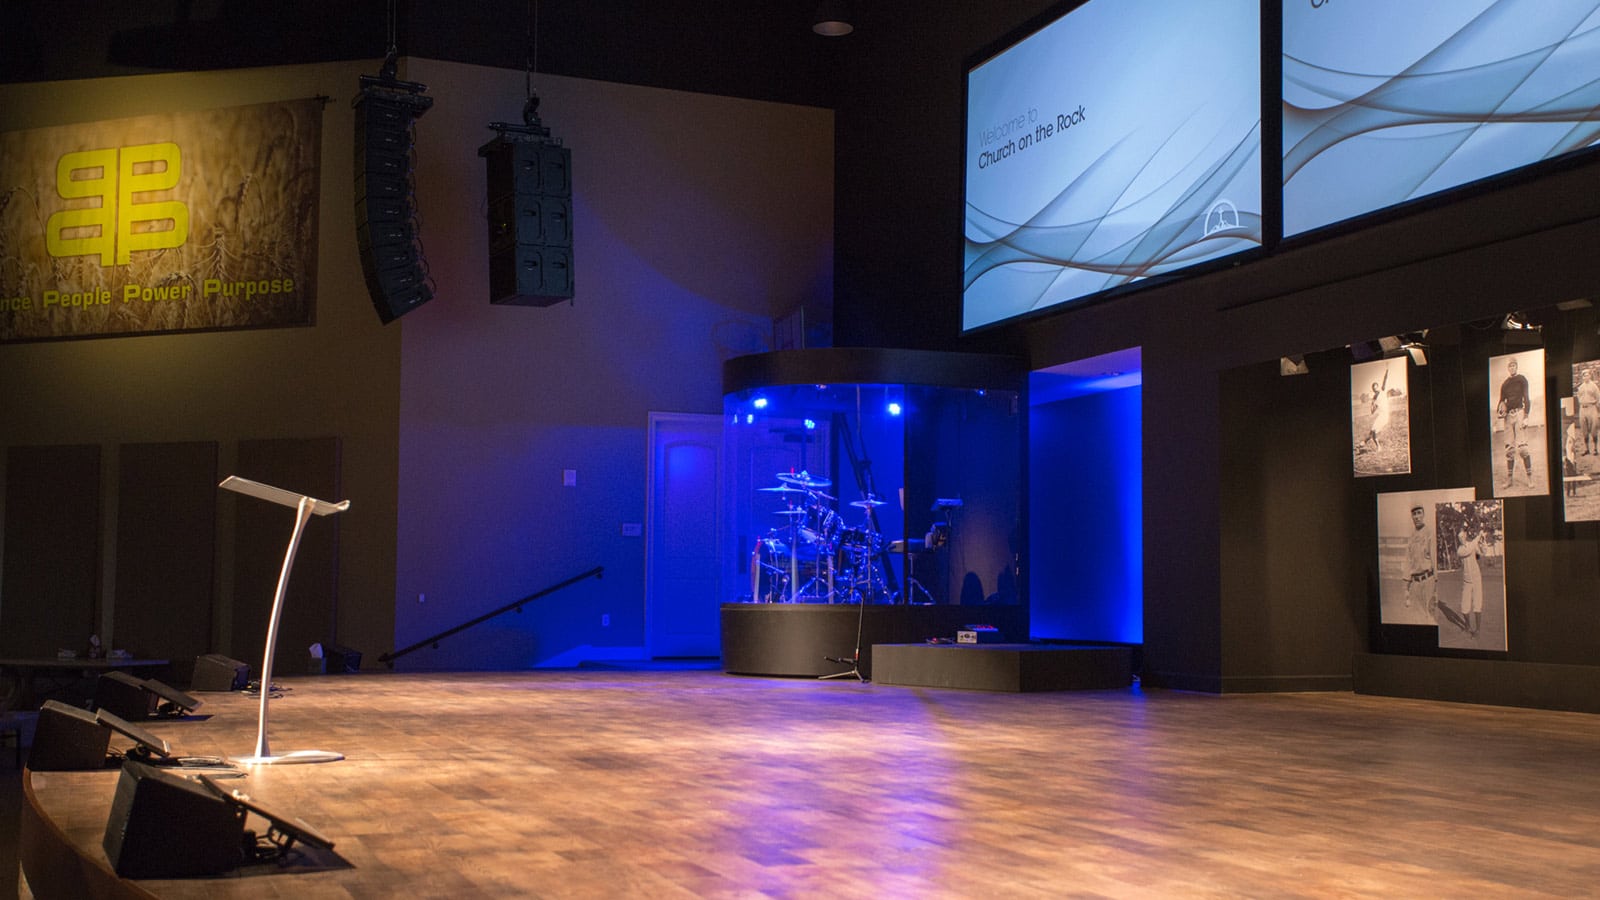 Church on the Rock in Texas Engages Congregants with Meyer Sound MINA